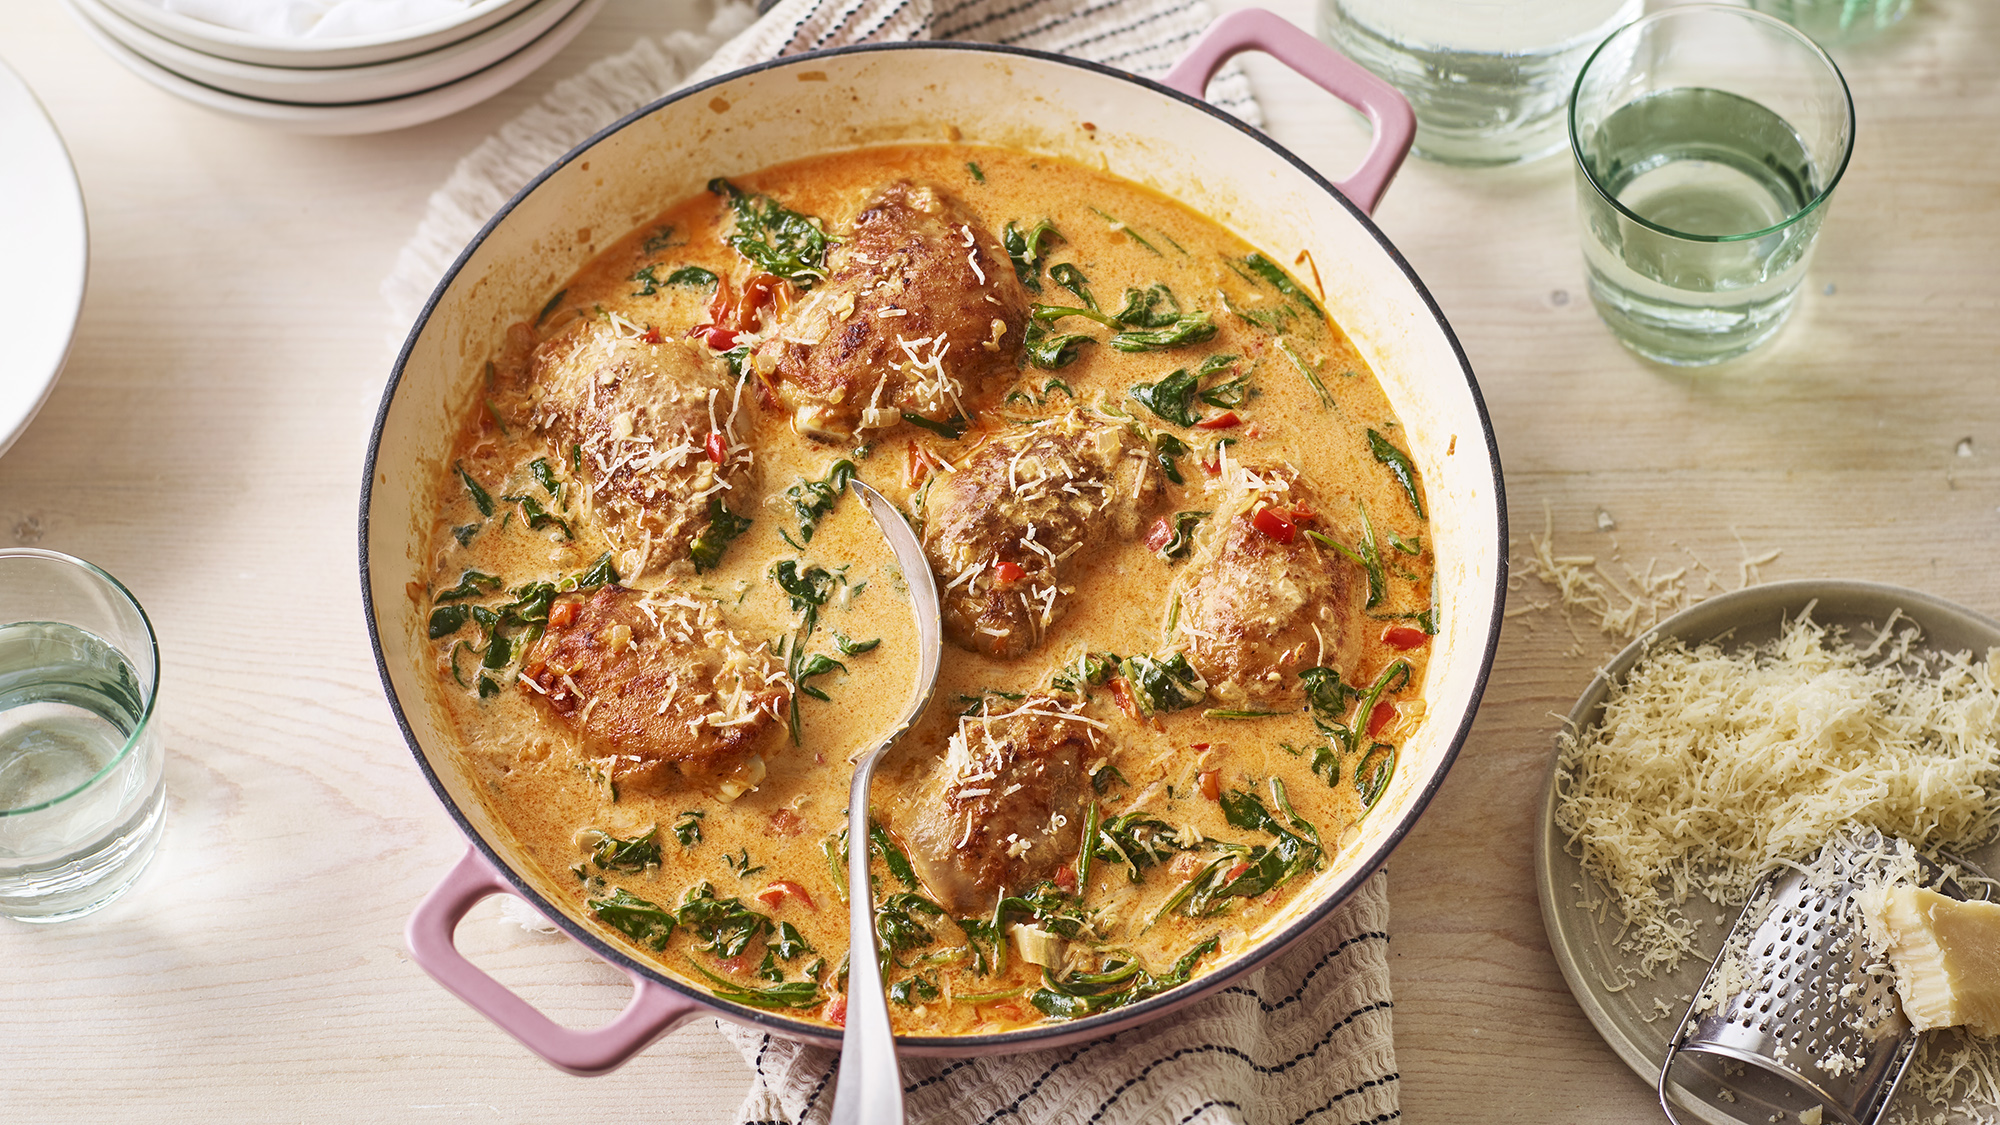 https://food-images.files.bbci.co.uk/food/recipes/tuscan_chicken_85727_16x9.jpg